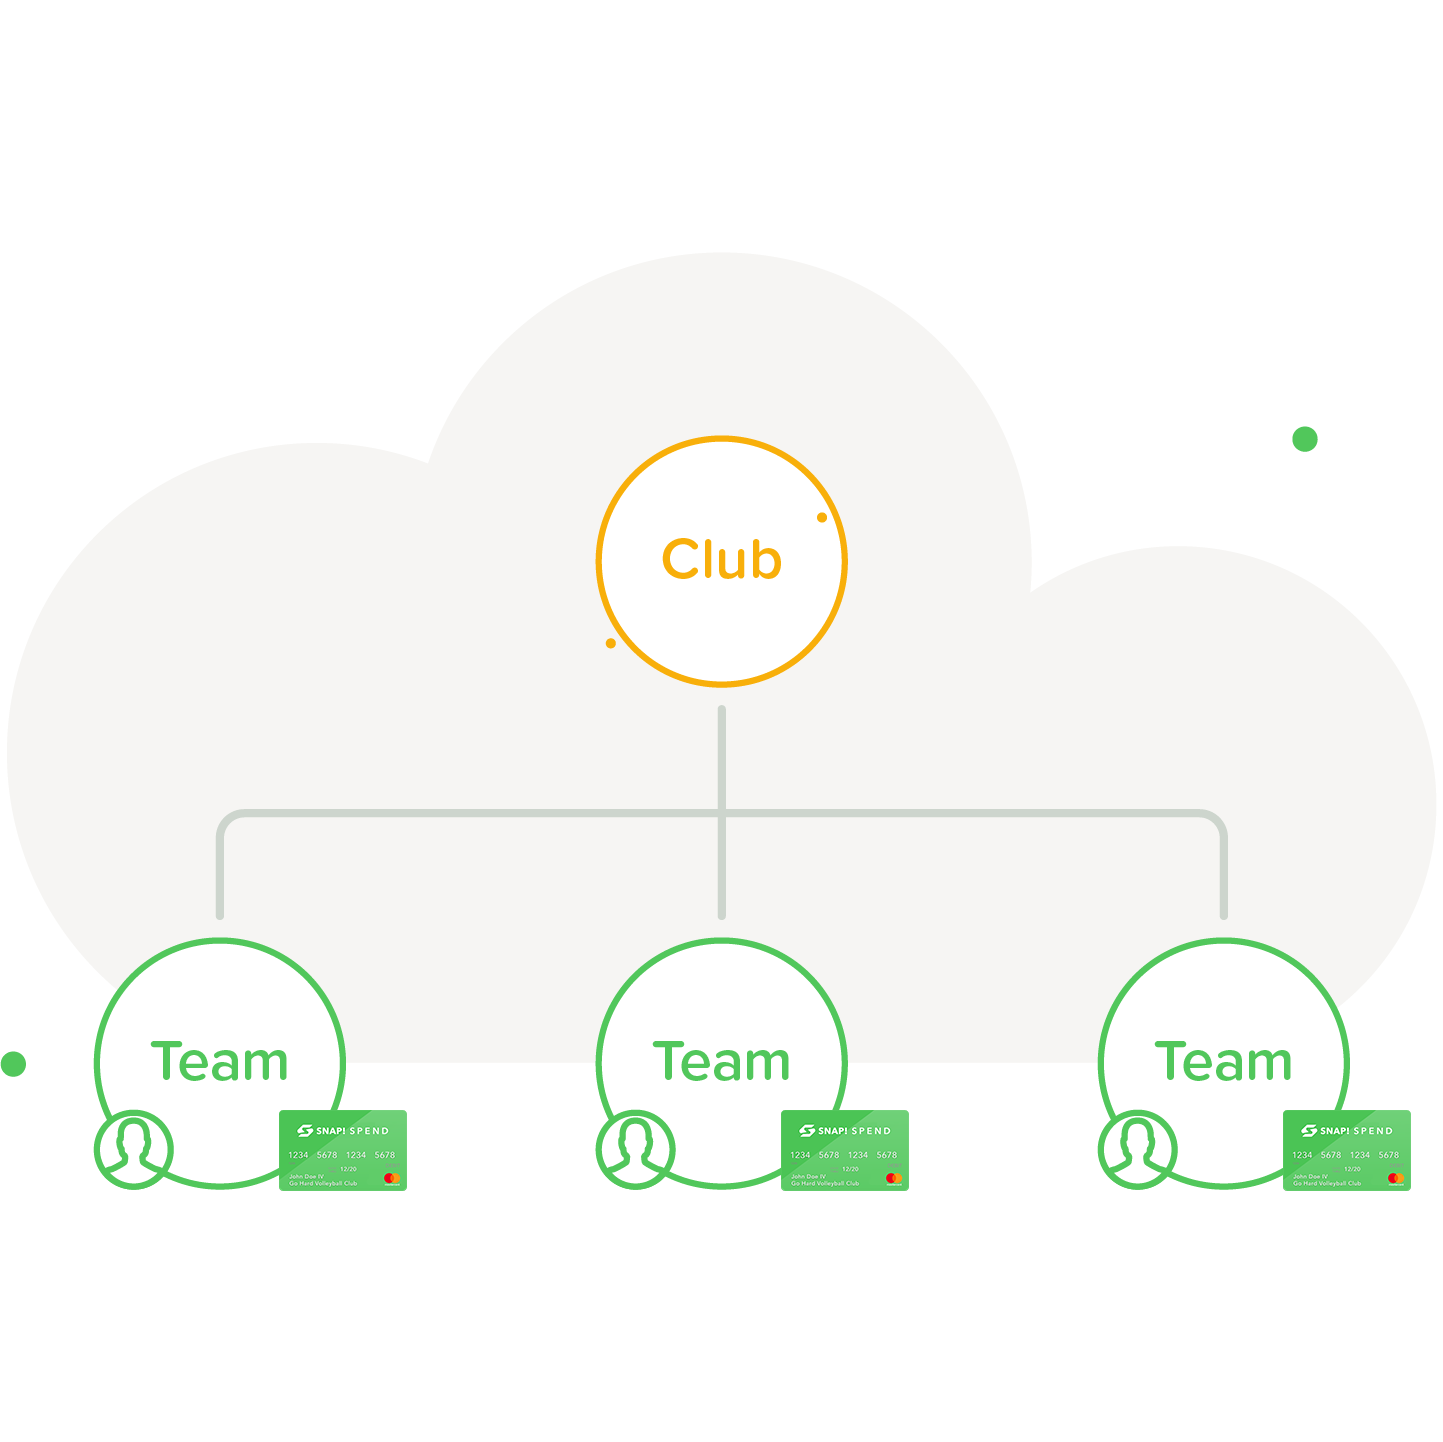 image of club team structure